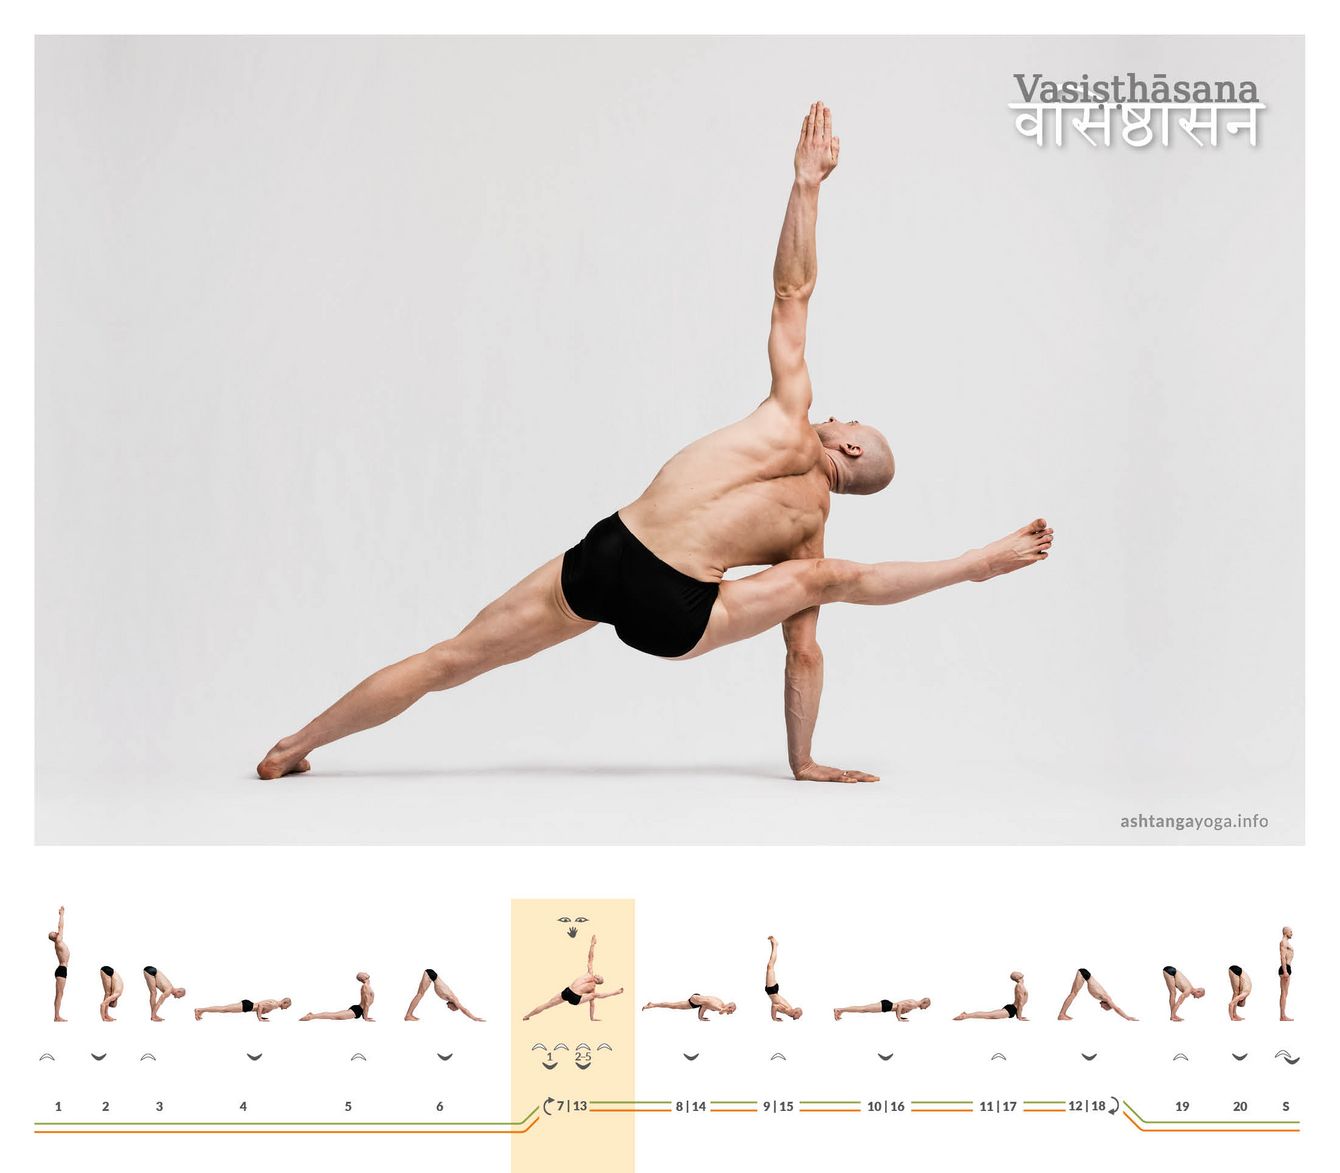 The "Pose Named after Vishvamitra" is a spectacular side plank pose where the lower leg extends forward over the supporting arm.